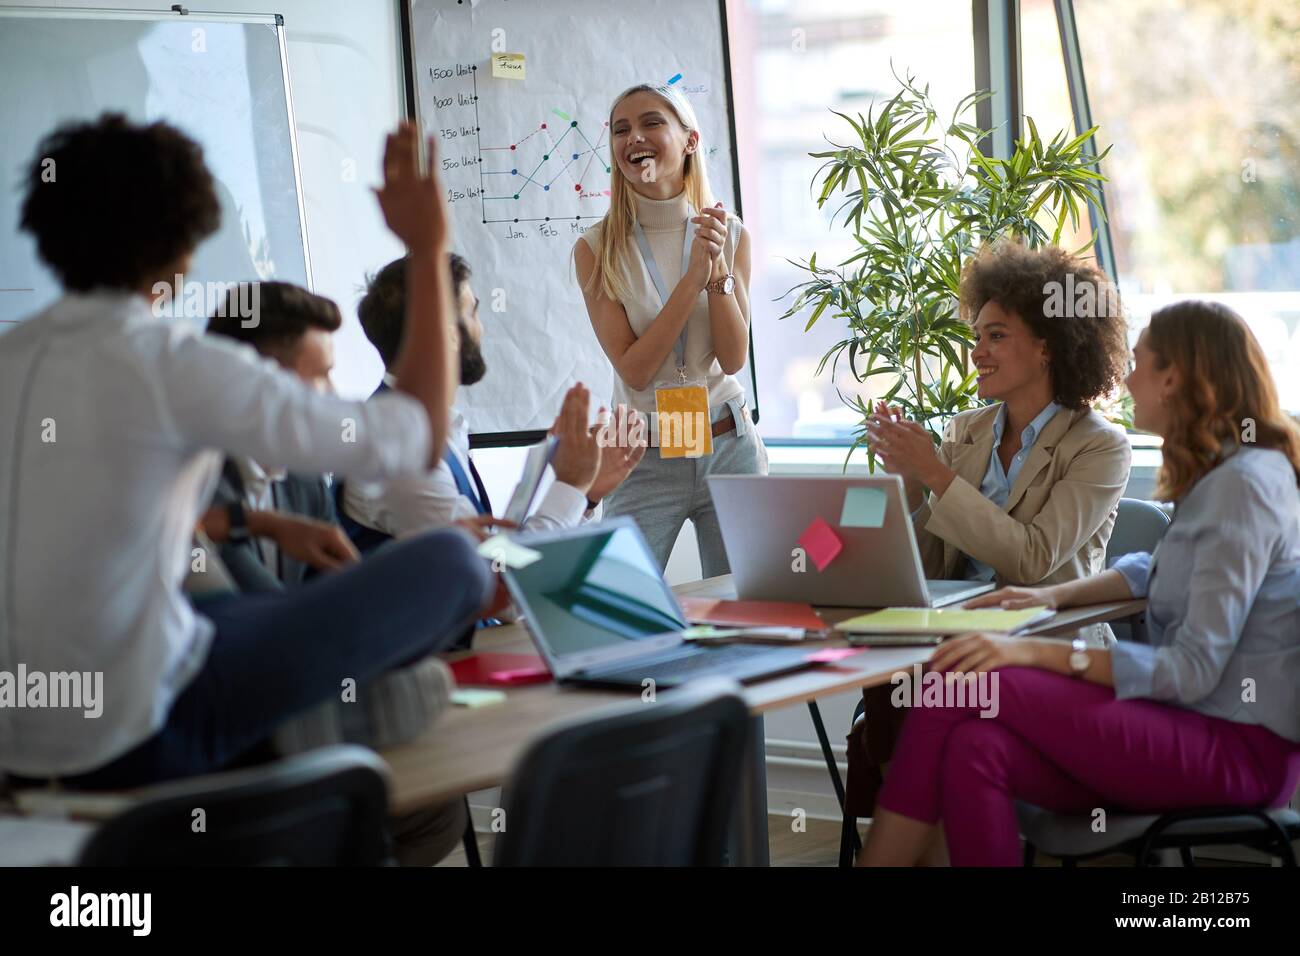 woman clapping hands with her associates on a business meeting. business, meeting, casual briefing concept Stock Photo